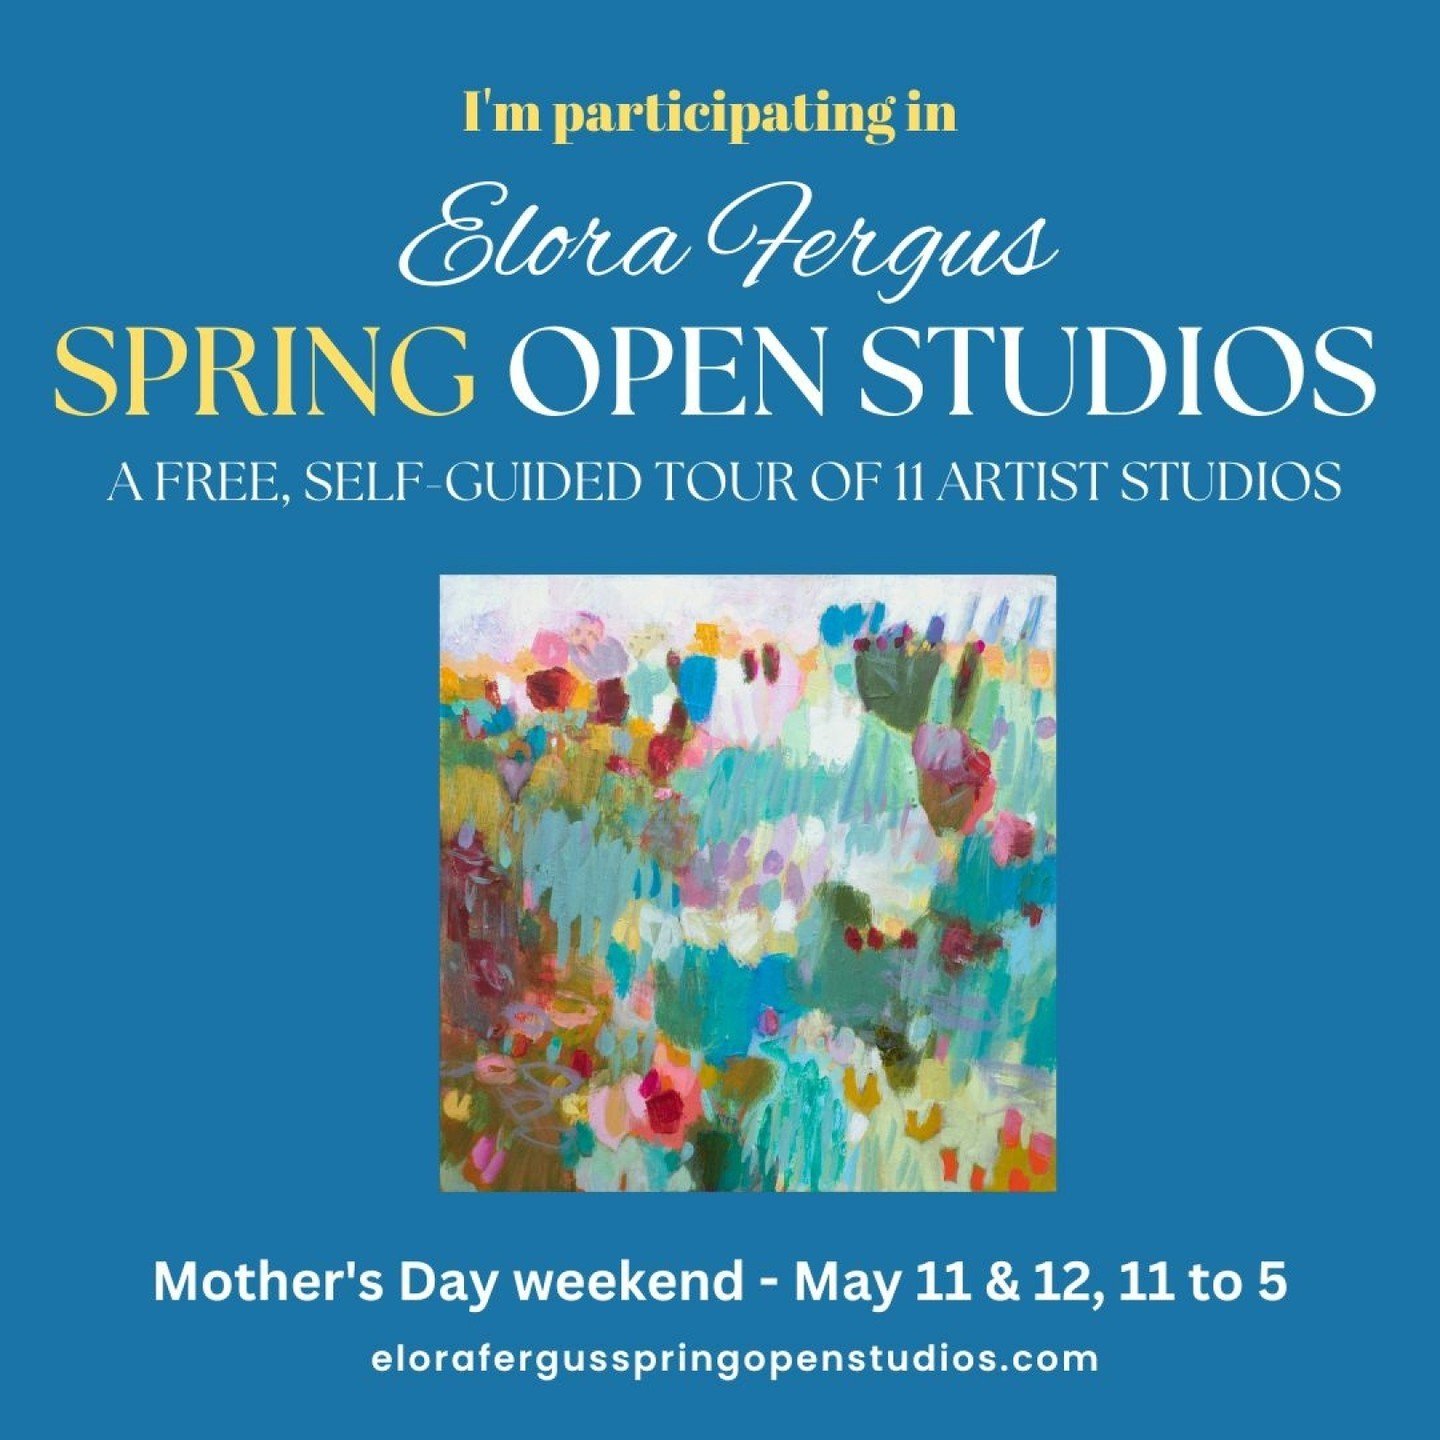 Hey guys, I am super excited to be a part of the Elora Fergus Studio Tour happening this Mother's Day weekend! 🎨👩&zwj;👧&zwj;👦

As a contemporary artist, I am thrilled to showcase some of my latest works and meet some amazing people along the way.